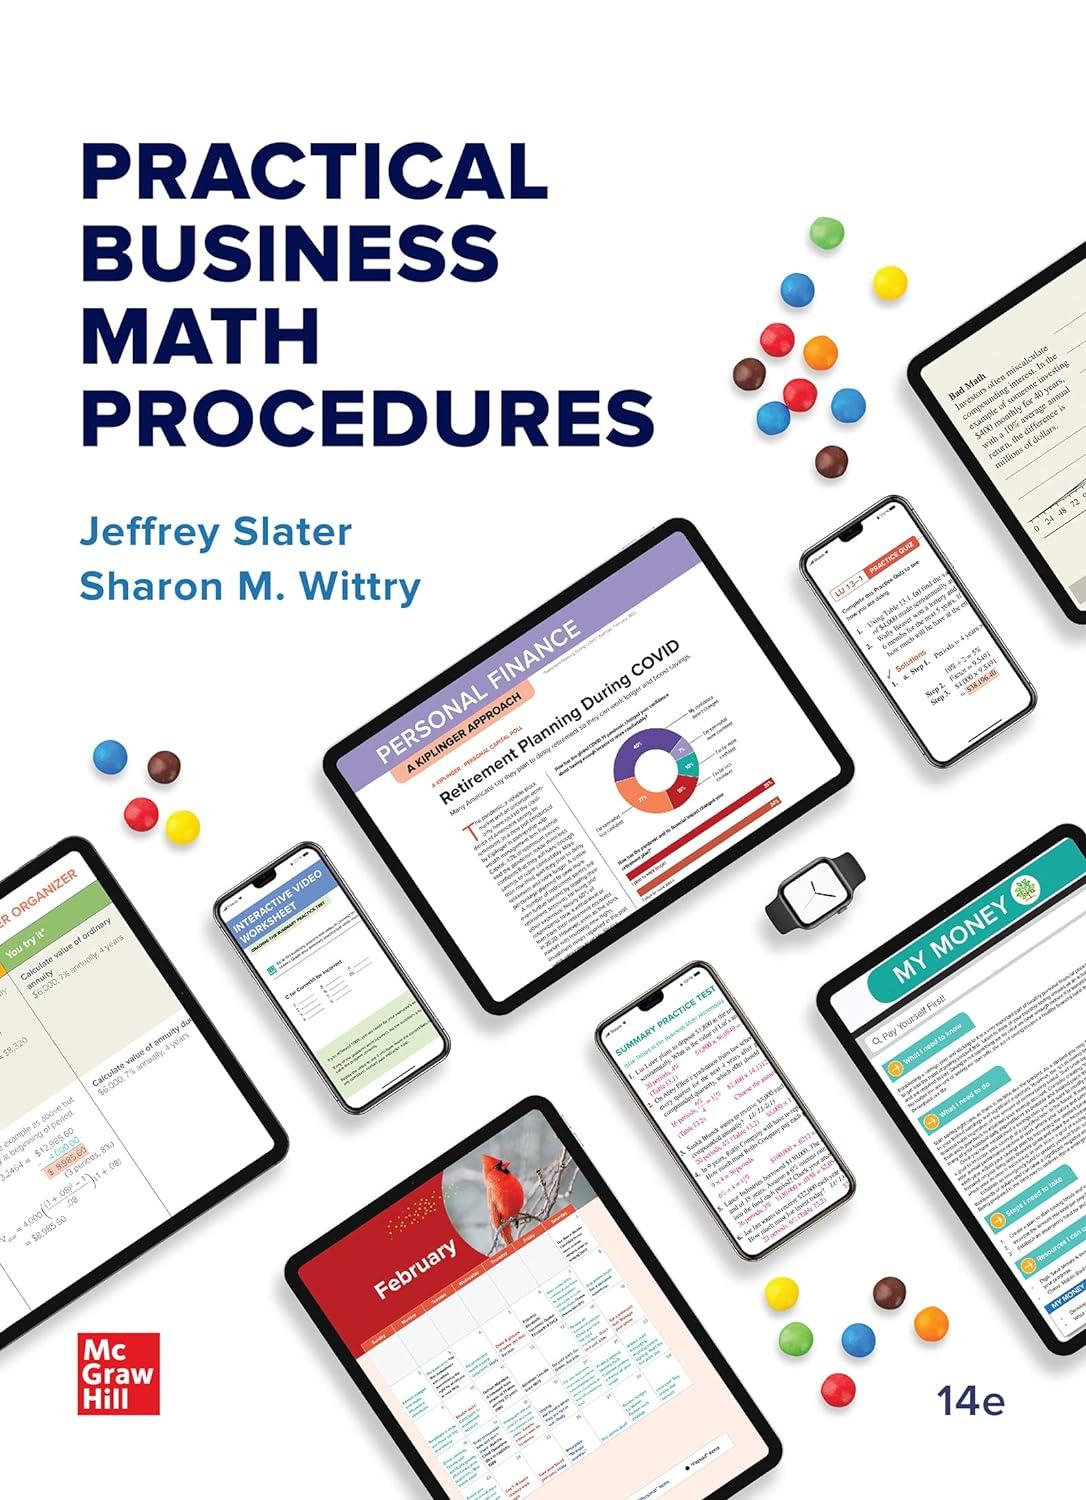 practical business math procedures 14th edition jeffrey slater, sharon wittry 1264098383, 978-1264098385